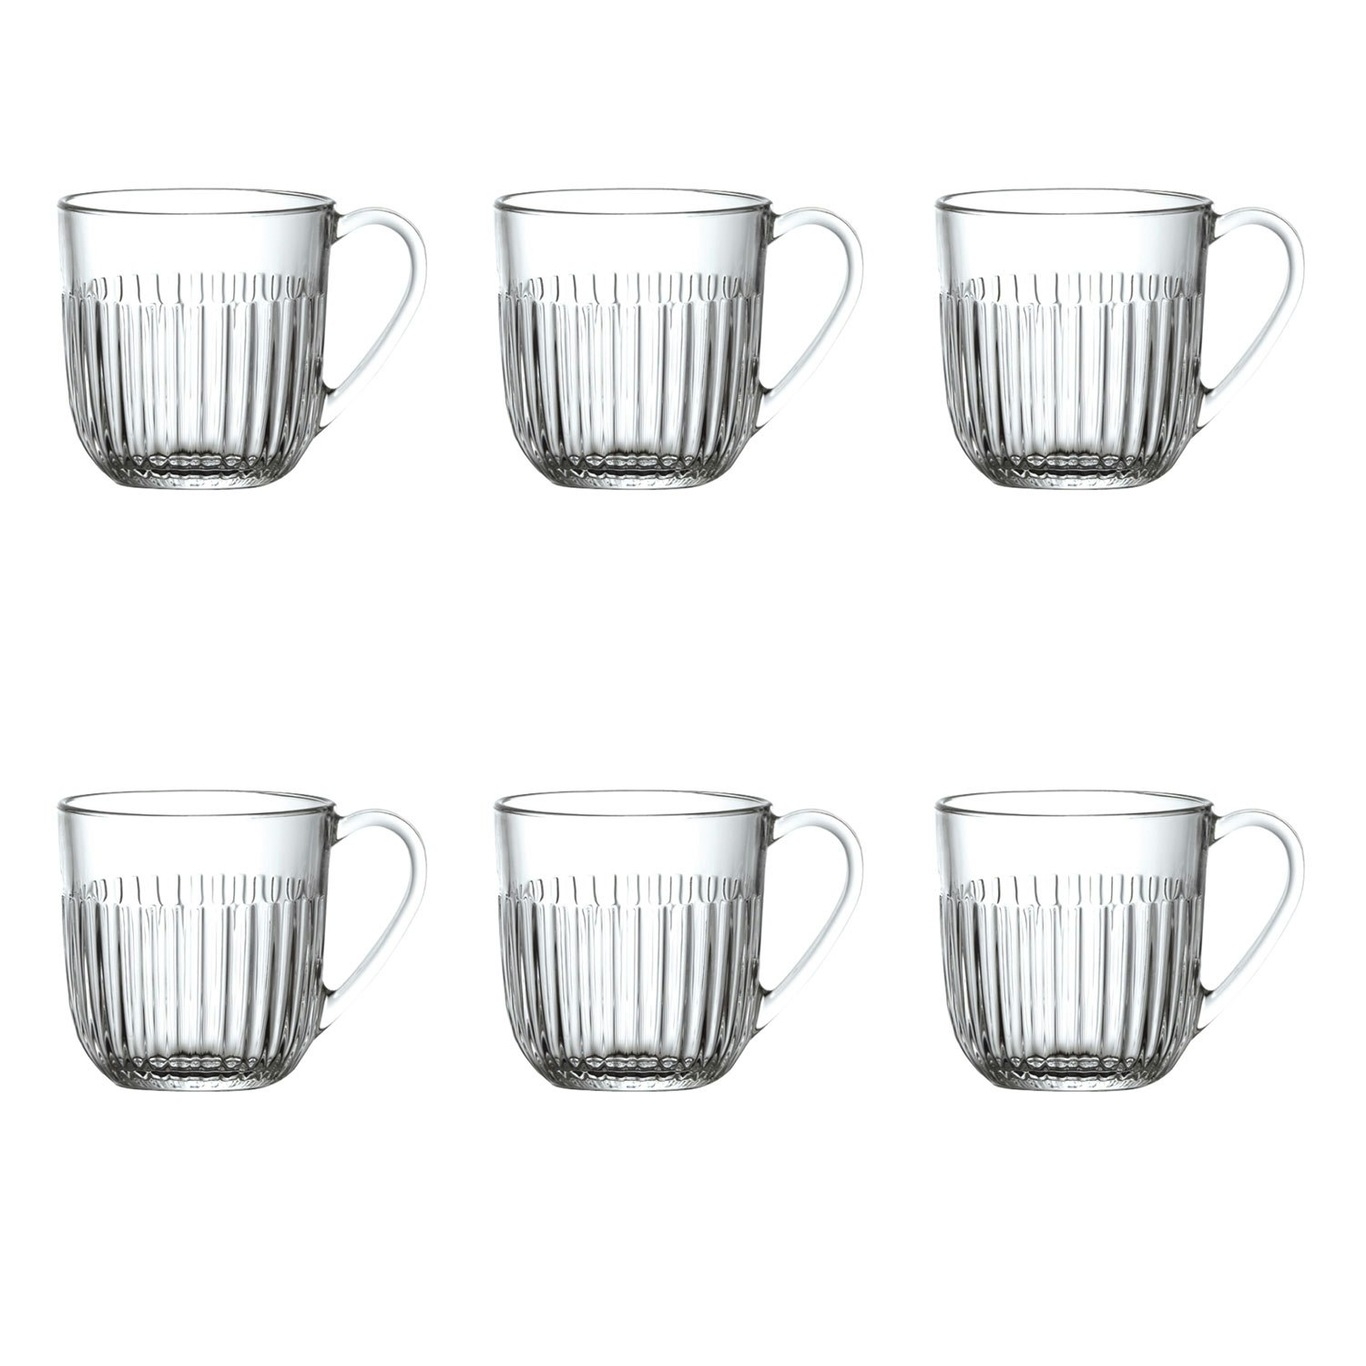 Ouessant Kaffemugg 27 cl, 6-pack